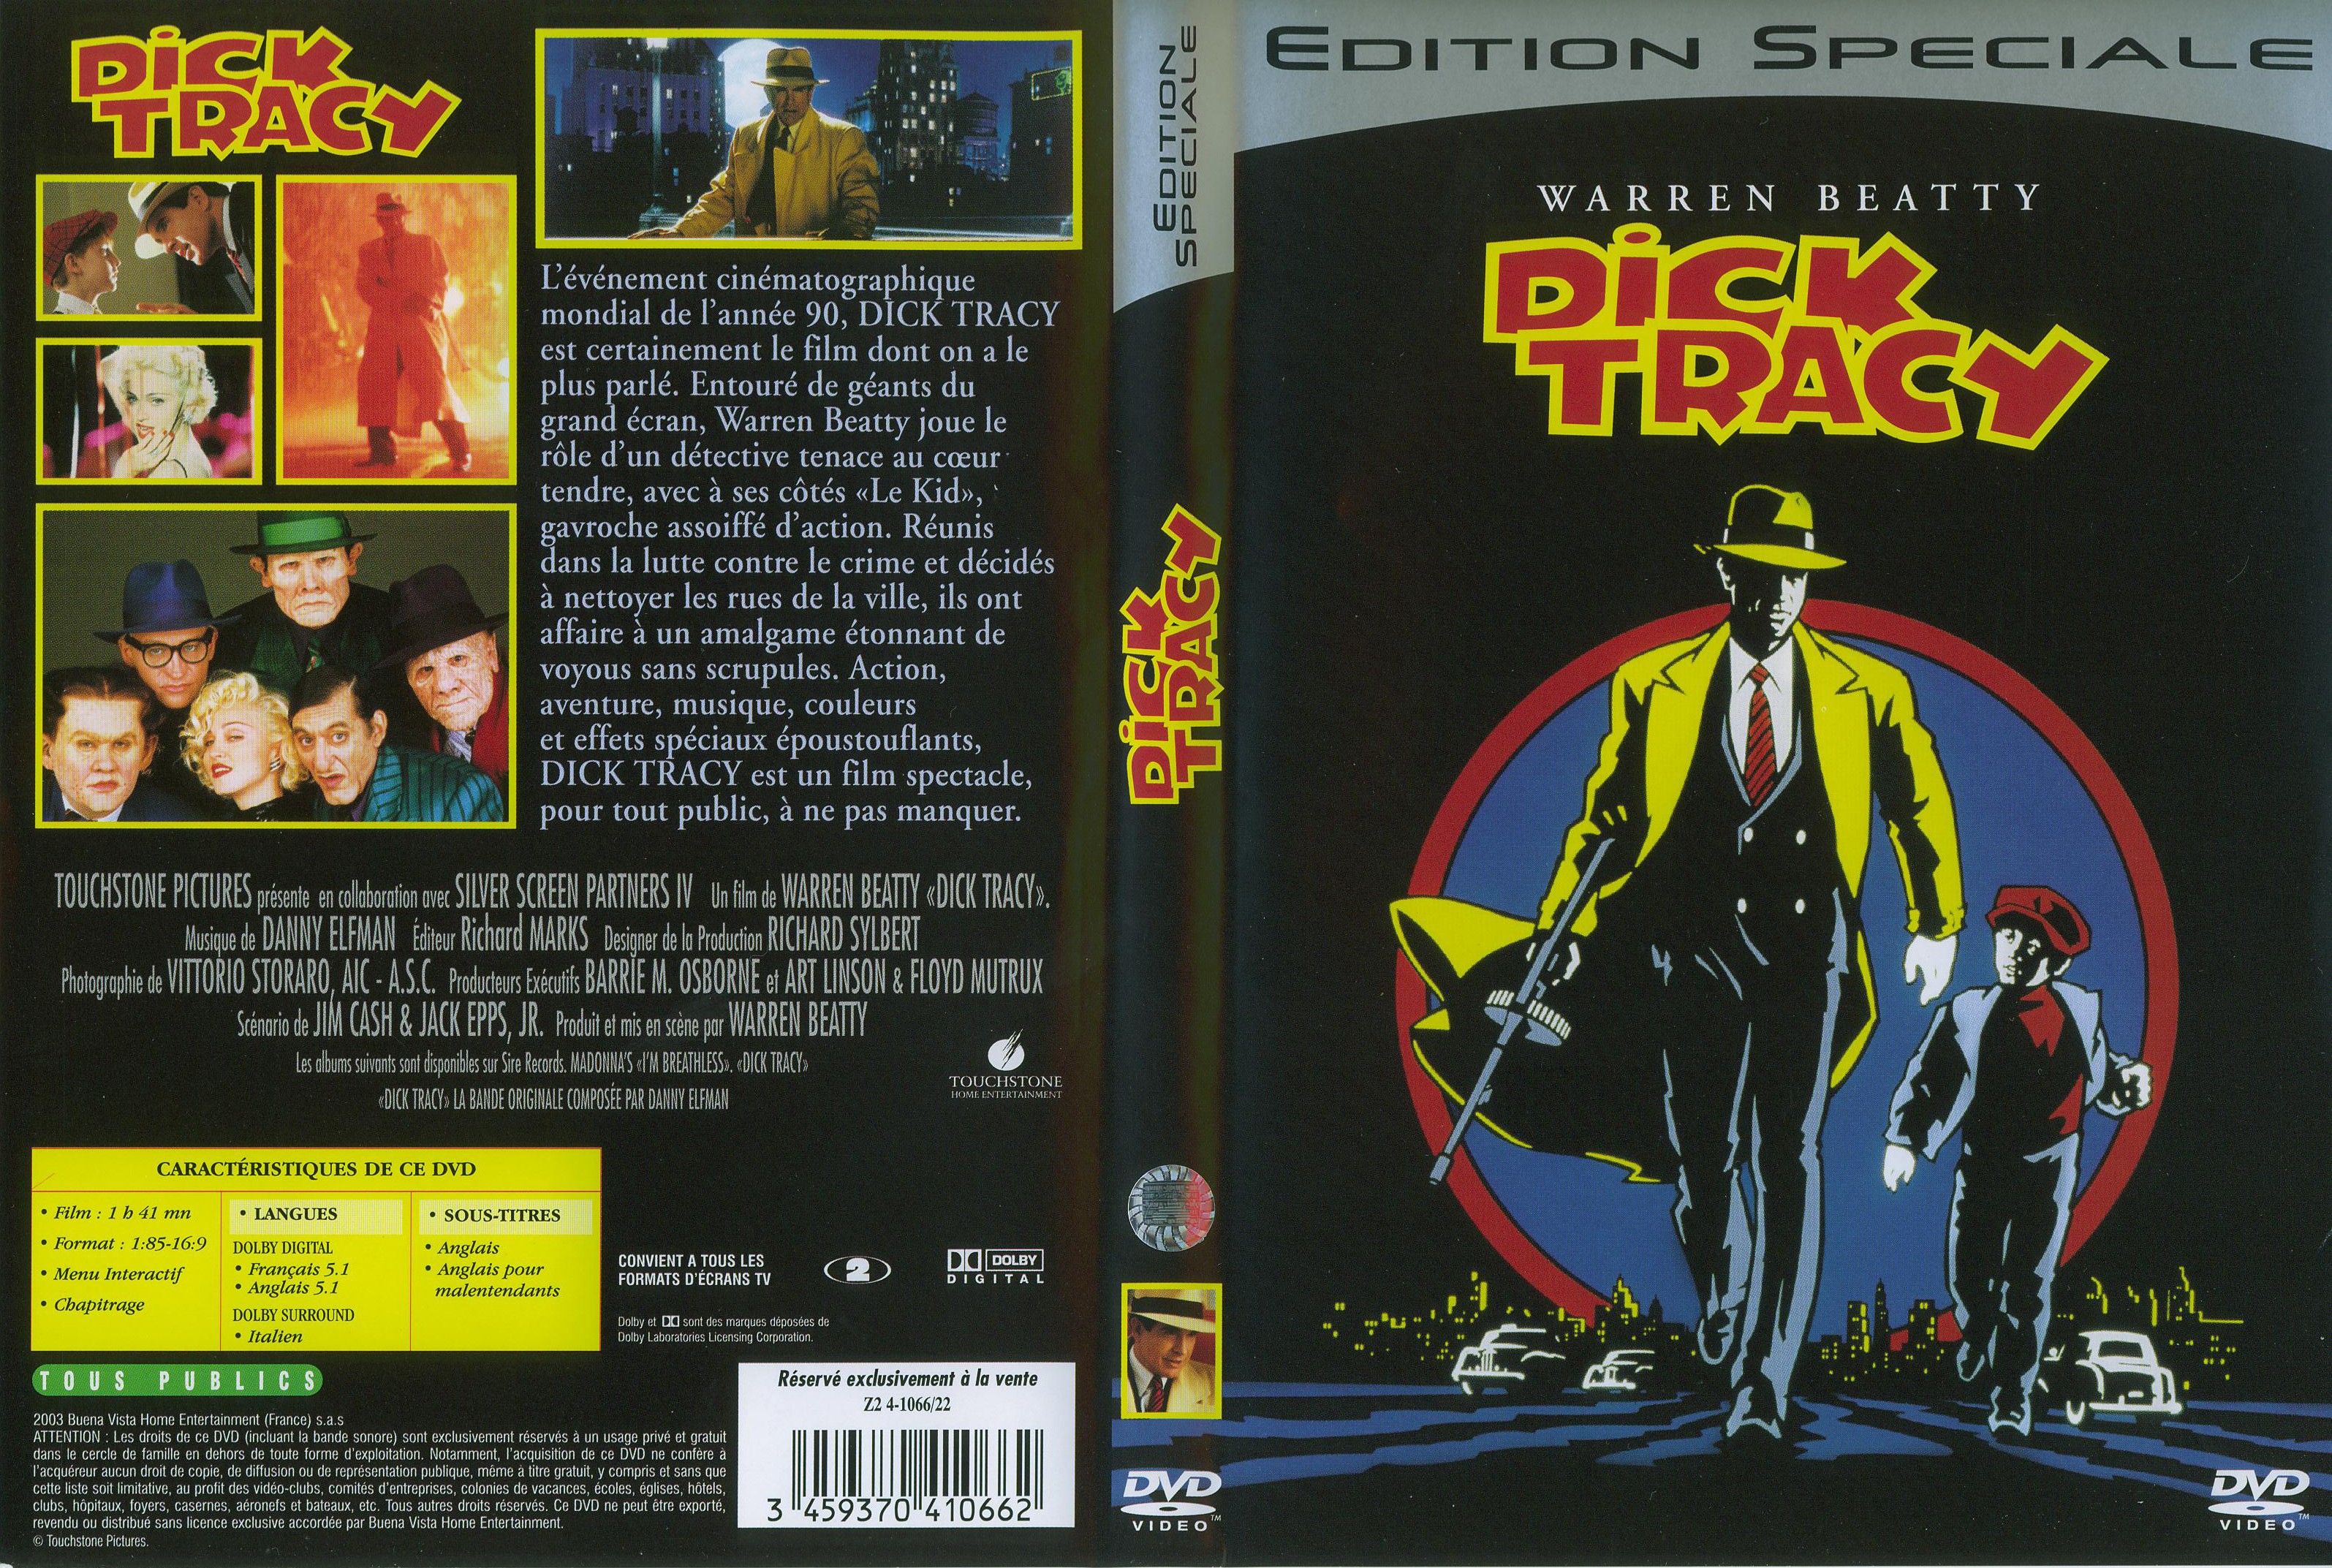 Jaquette DVD Dick Tracy